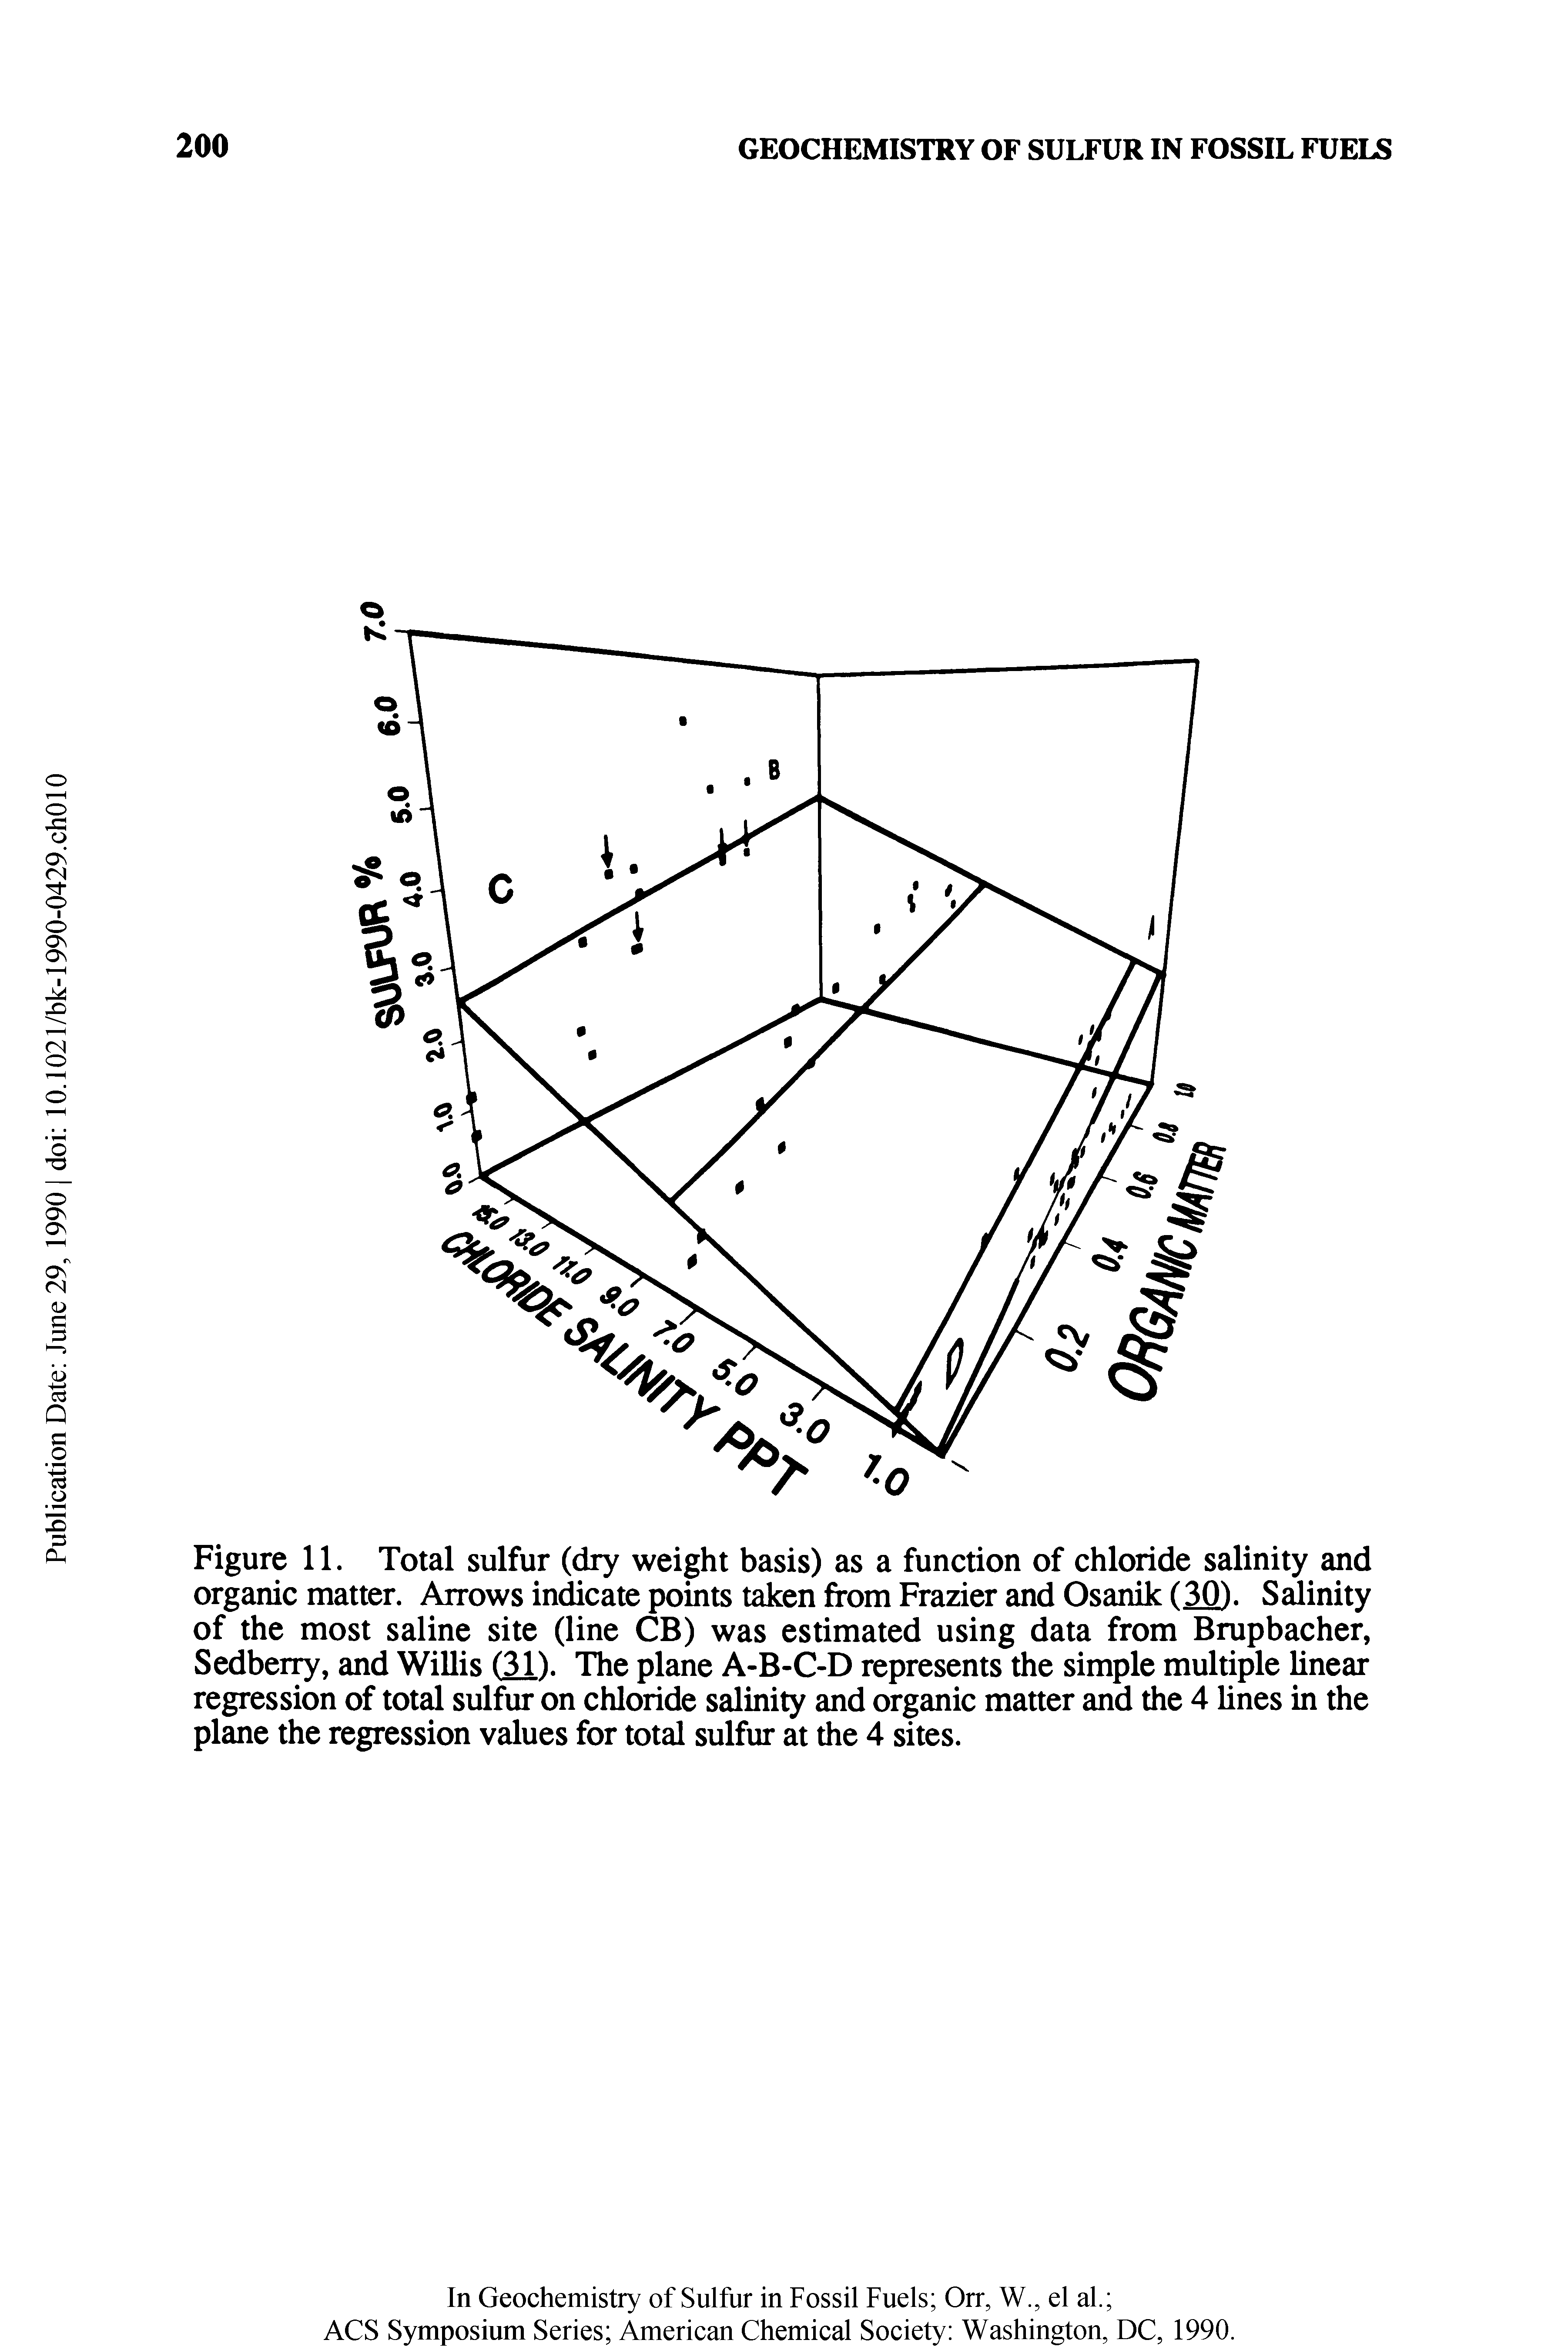 Figure 11. Total sulfur (dry weight basis) as a function of chloride salinity and organic matter. Arrows indicate points taken from Frazier and Osanik (30). Salinity of the most saline site (line CB) was estimated using data from Brupbacher, Sedberry, and Willis (31). The plane A-B-C-D represents the simple multiple linear regression of total sulfur on chloride salinity and organic matter and the 4 lines in the plane the regression values for total sulfur at the 4 sites.